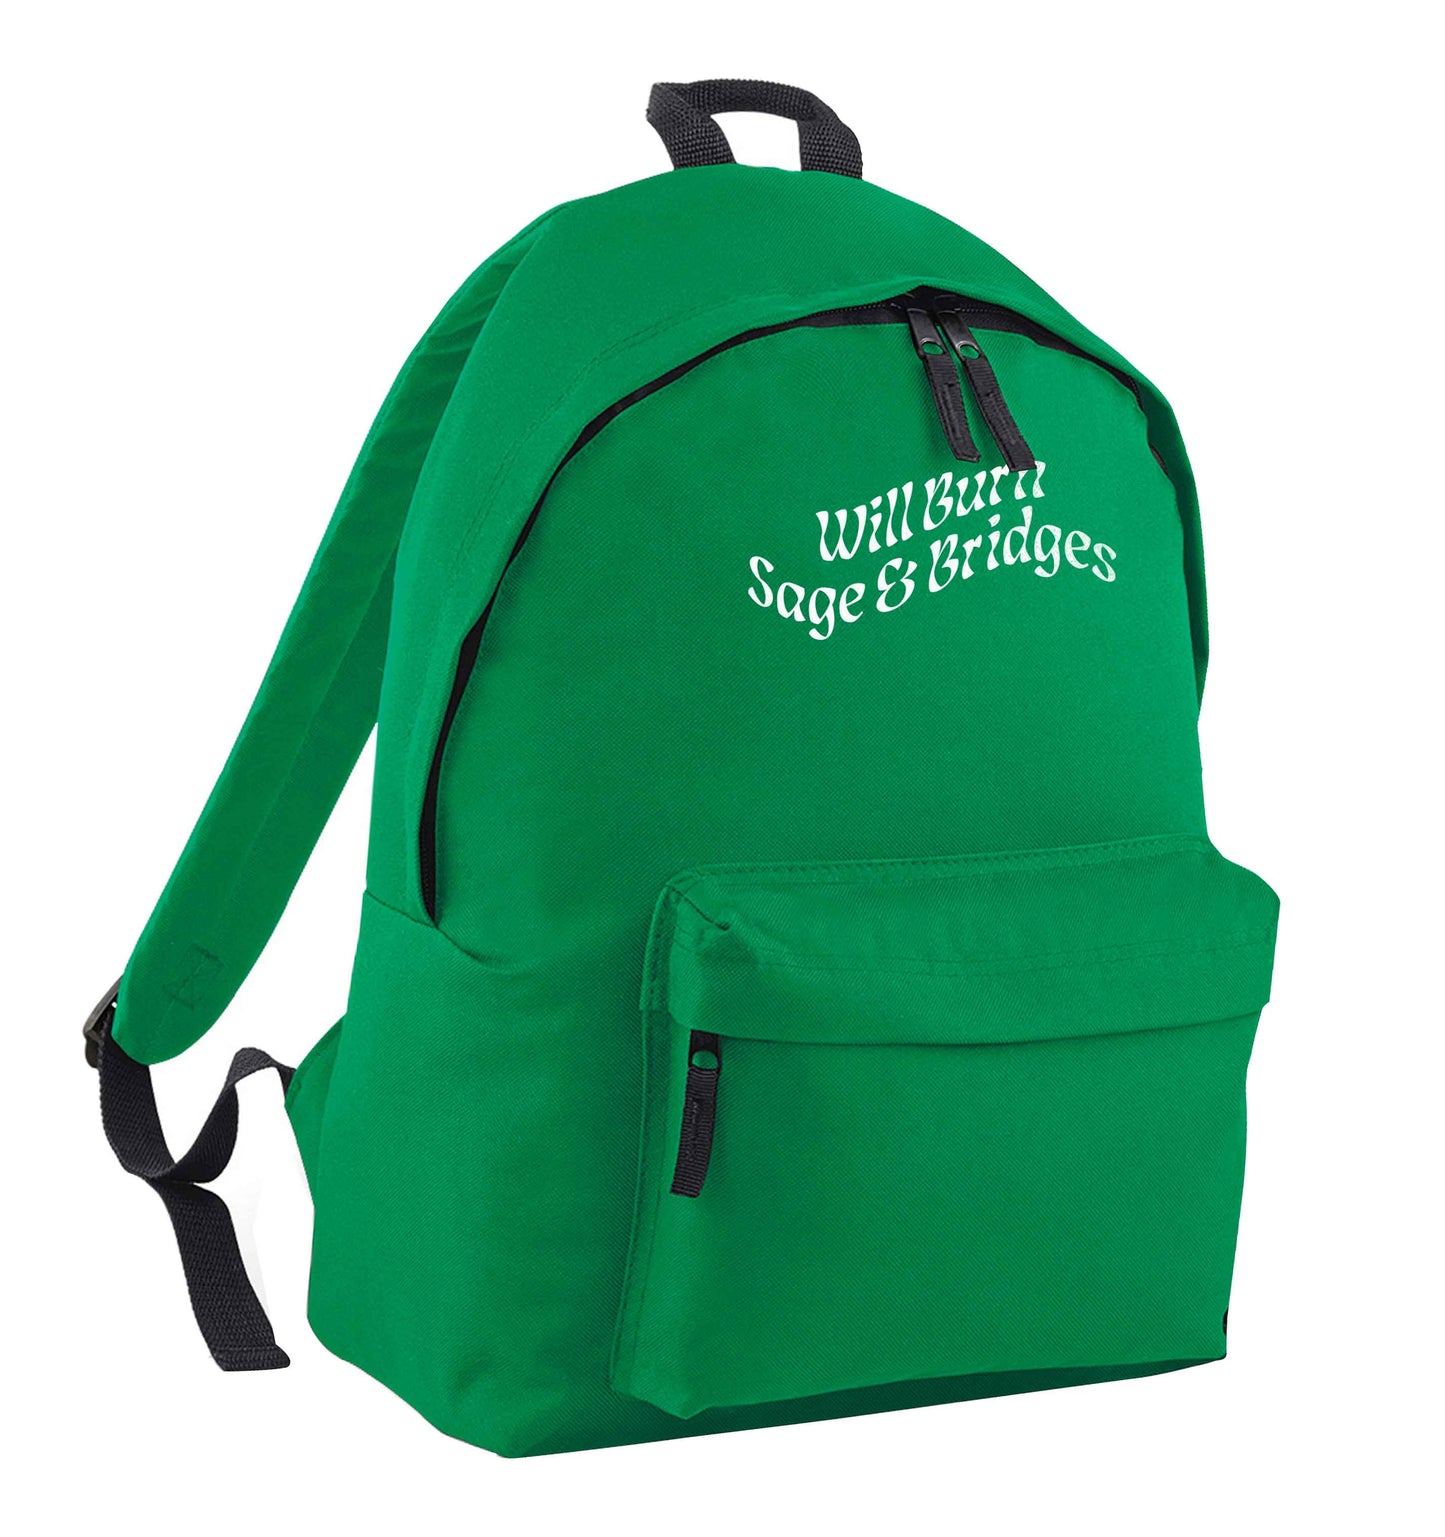 Will burn bridges and sage green adults backpack